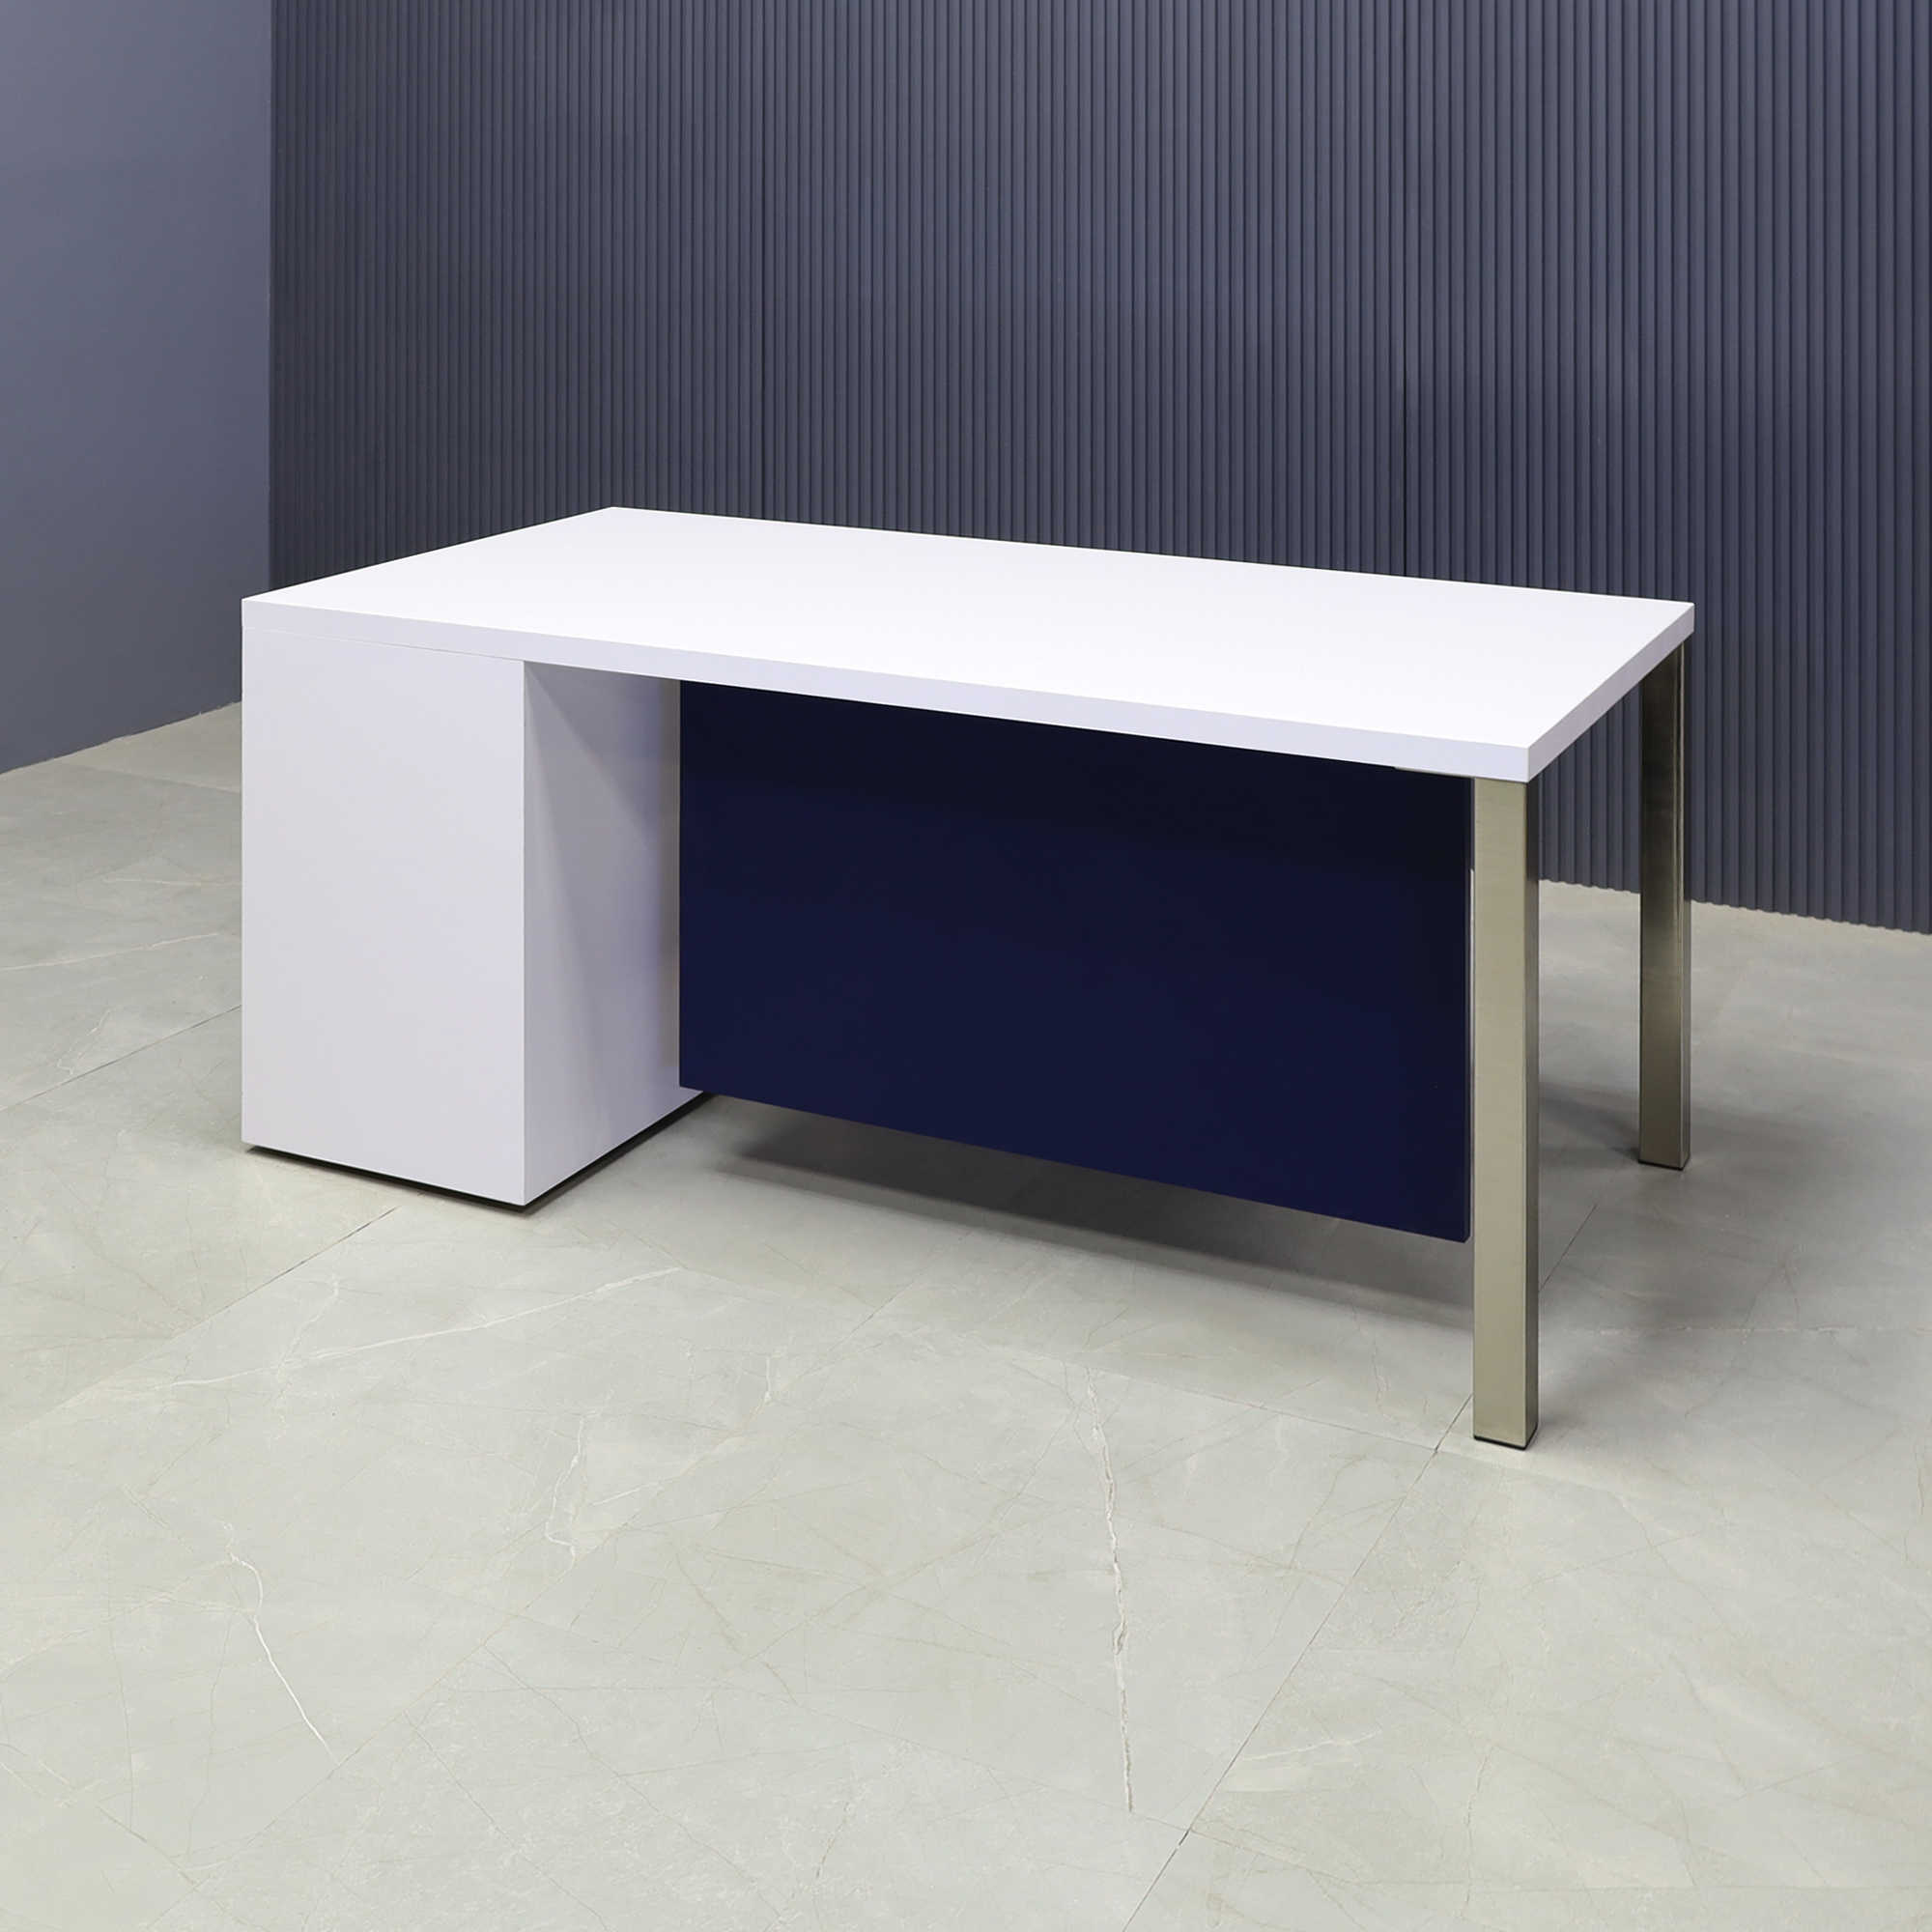 Dallas Straight Executive Desk With Cabinet and Laminate Top in white gloss laminate top and cabinet, and navy blue matte laminate privacy panel, with brushed aluminum legs shown here.